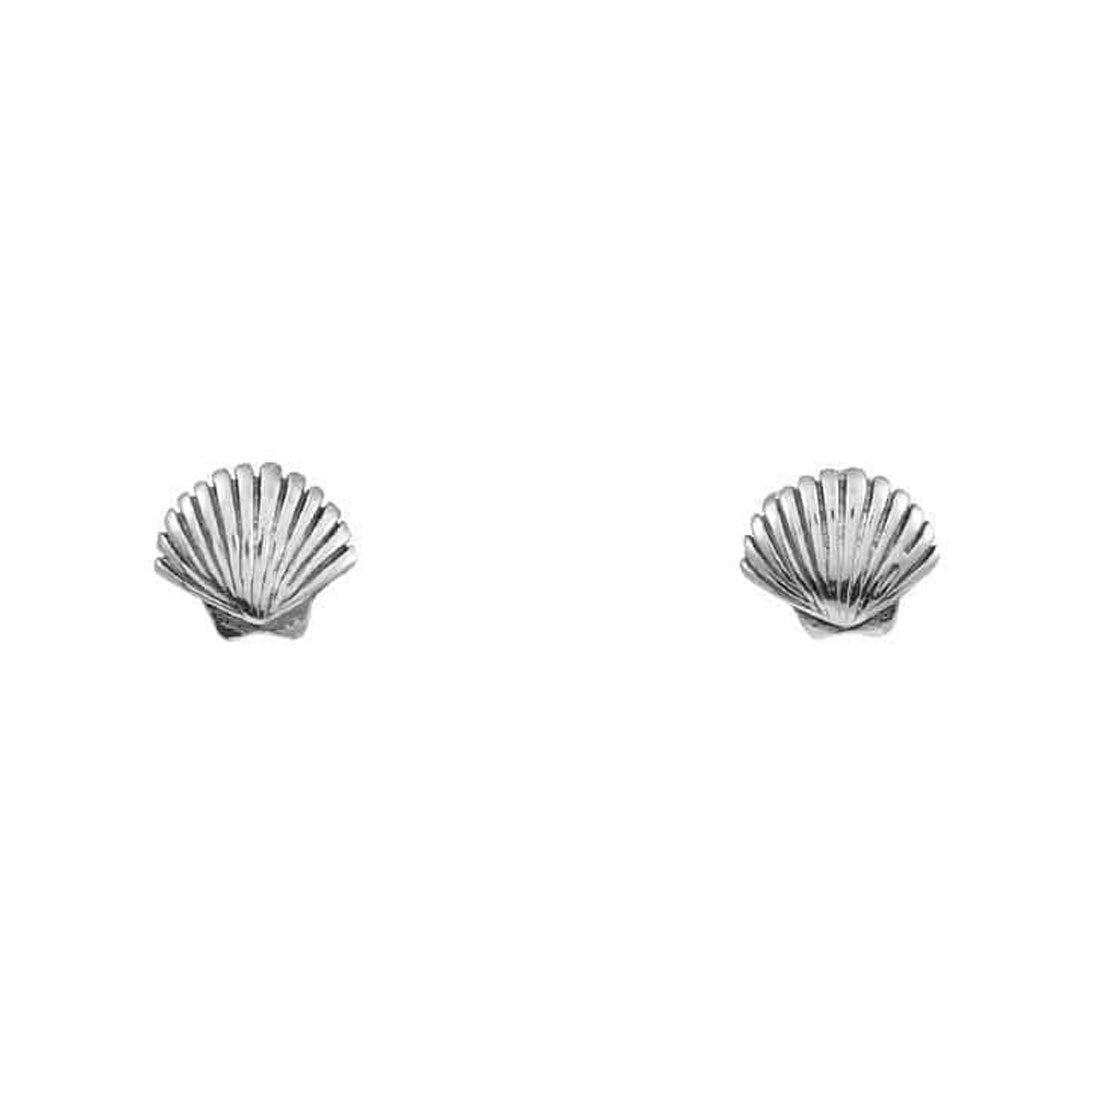 Midsummer Star Dainty Seashell Stud - Sterling Silver - Little Extras Lifestyle Boutique